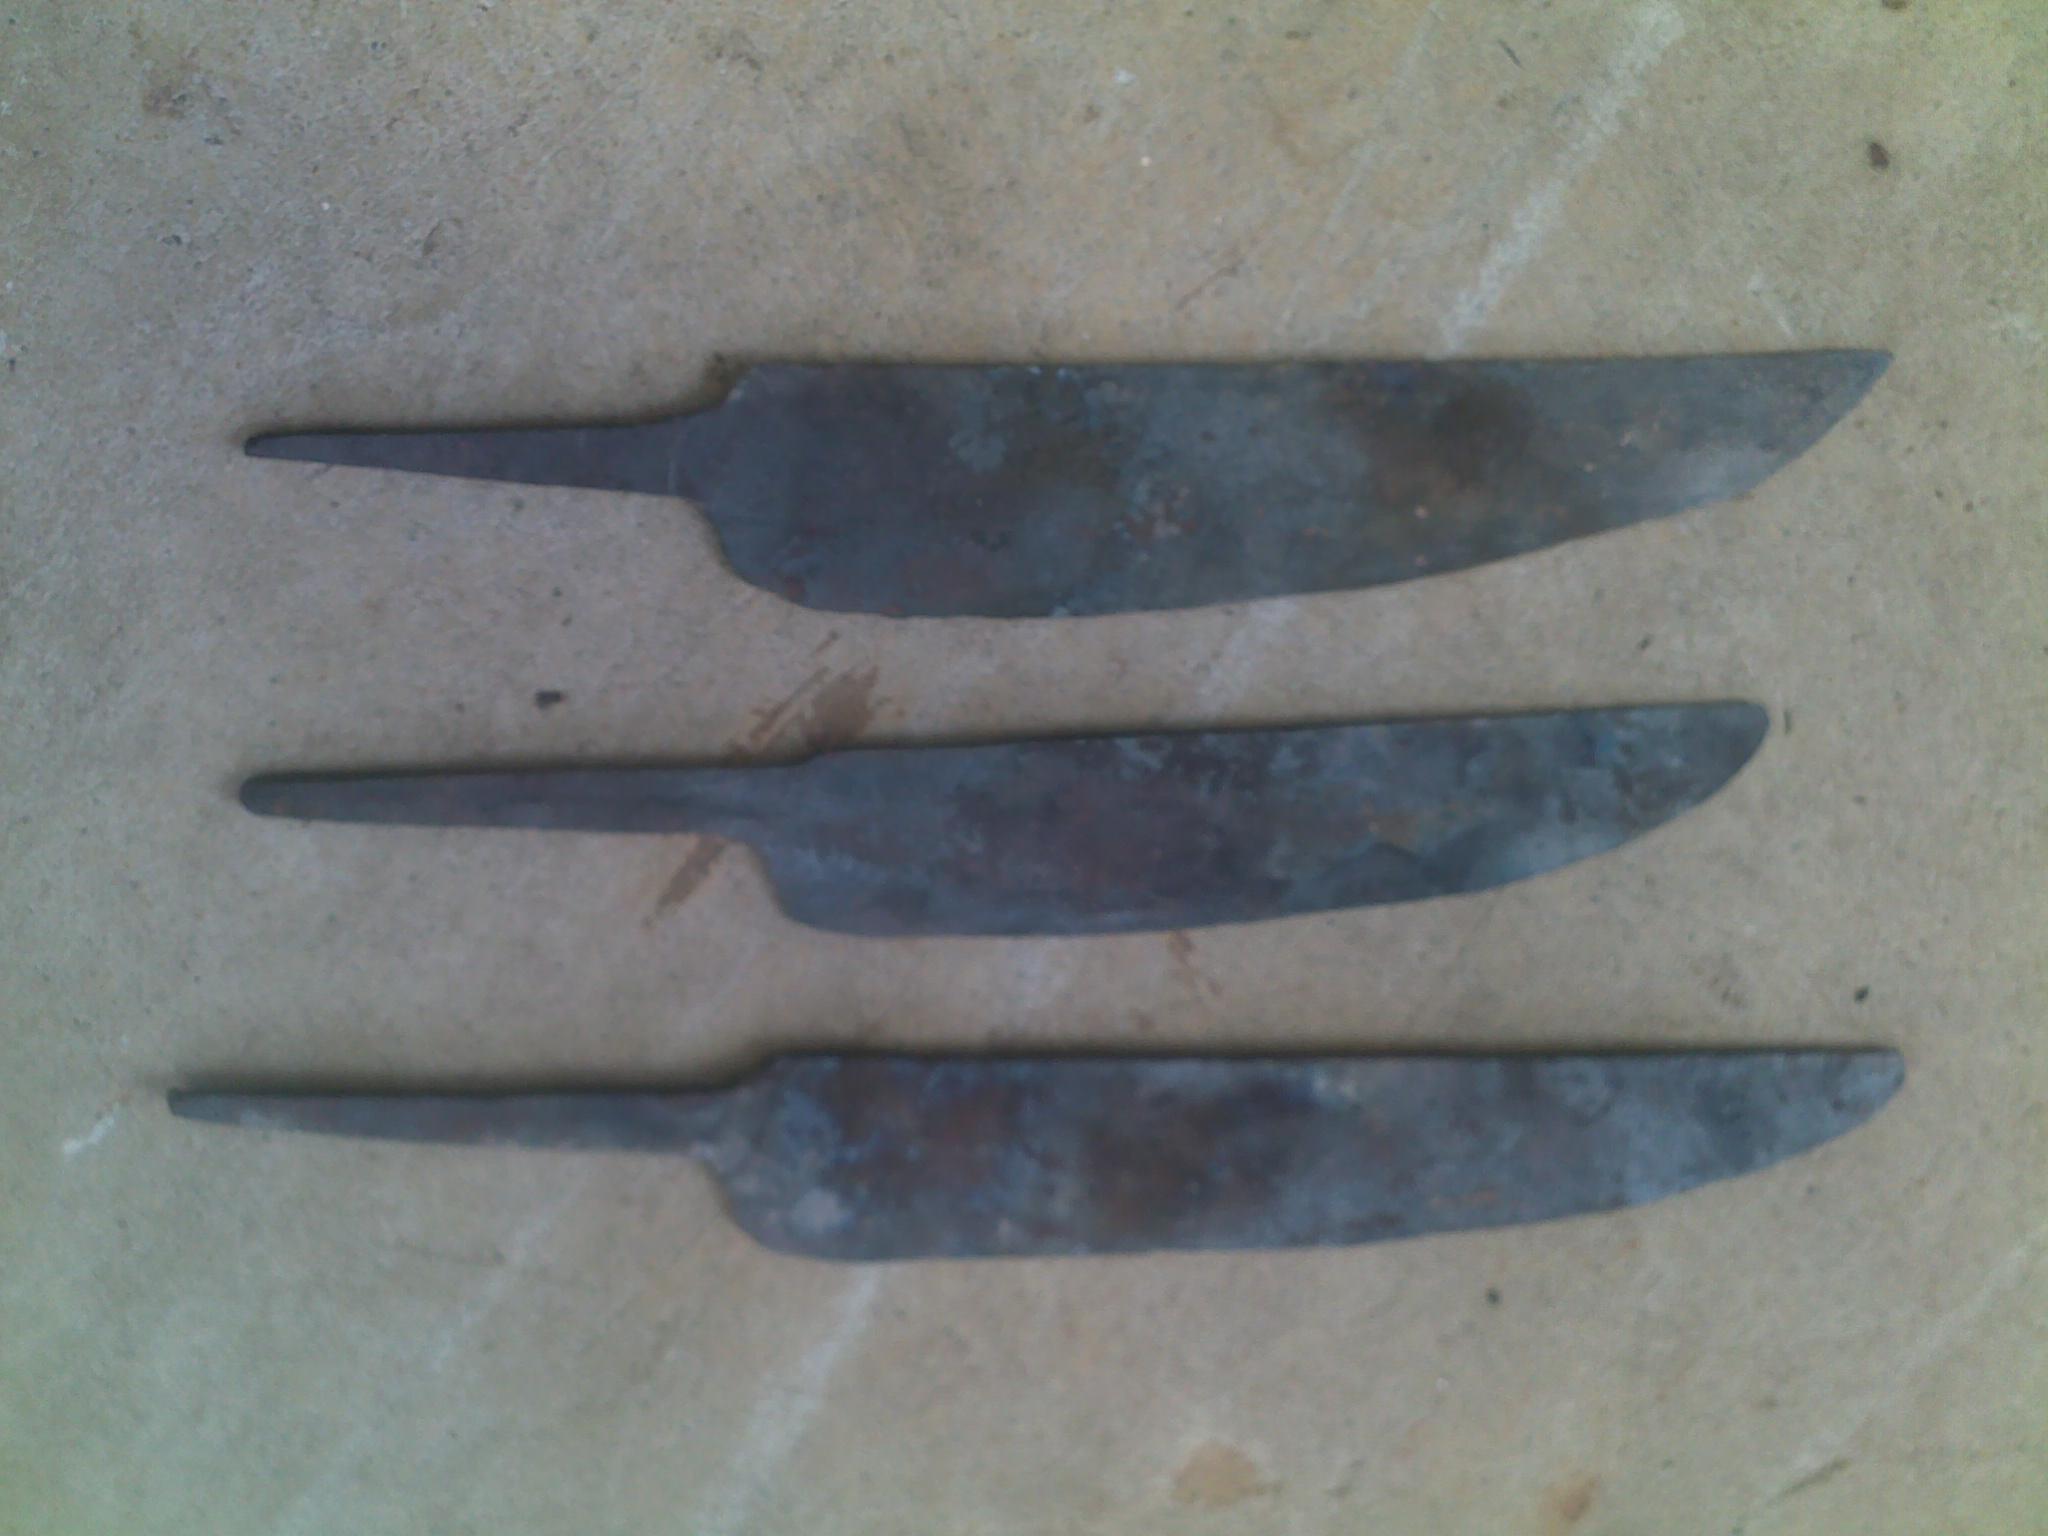 Three other knives I made afterwards